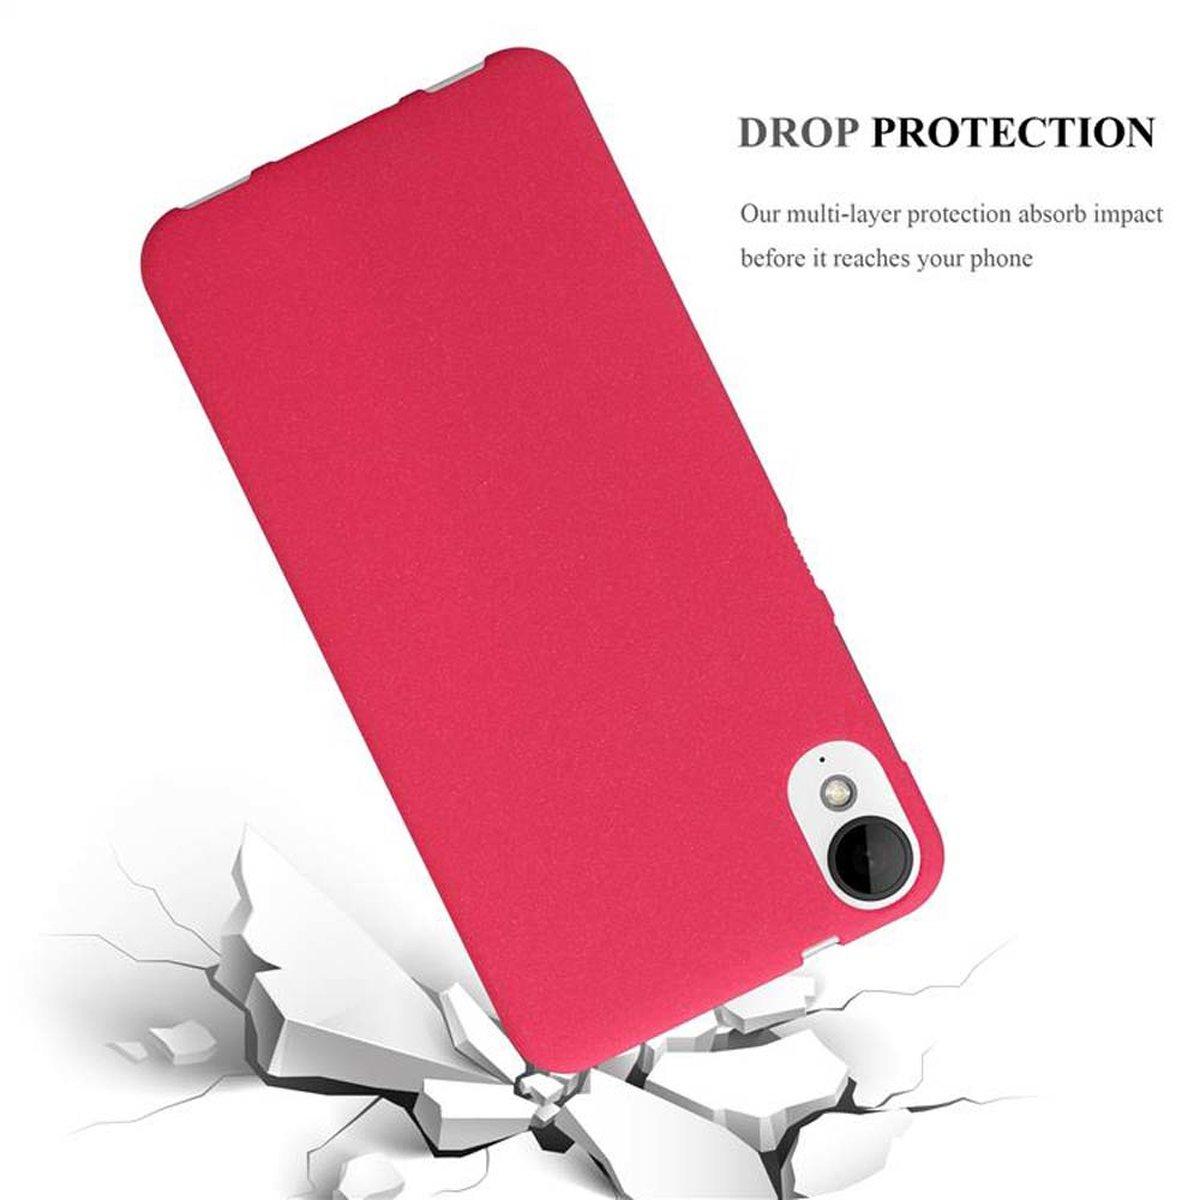 825, / Desire Desire ROT CADORABO TPU Frosted LIFESTYLE FROST HTC, 10 Backcover, Schutzhülle,